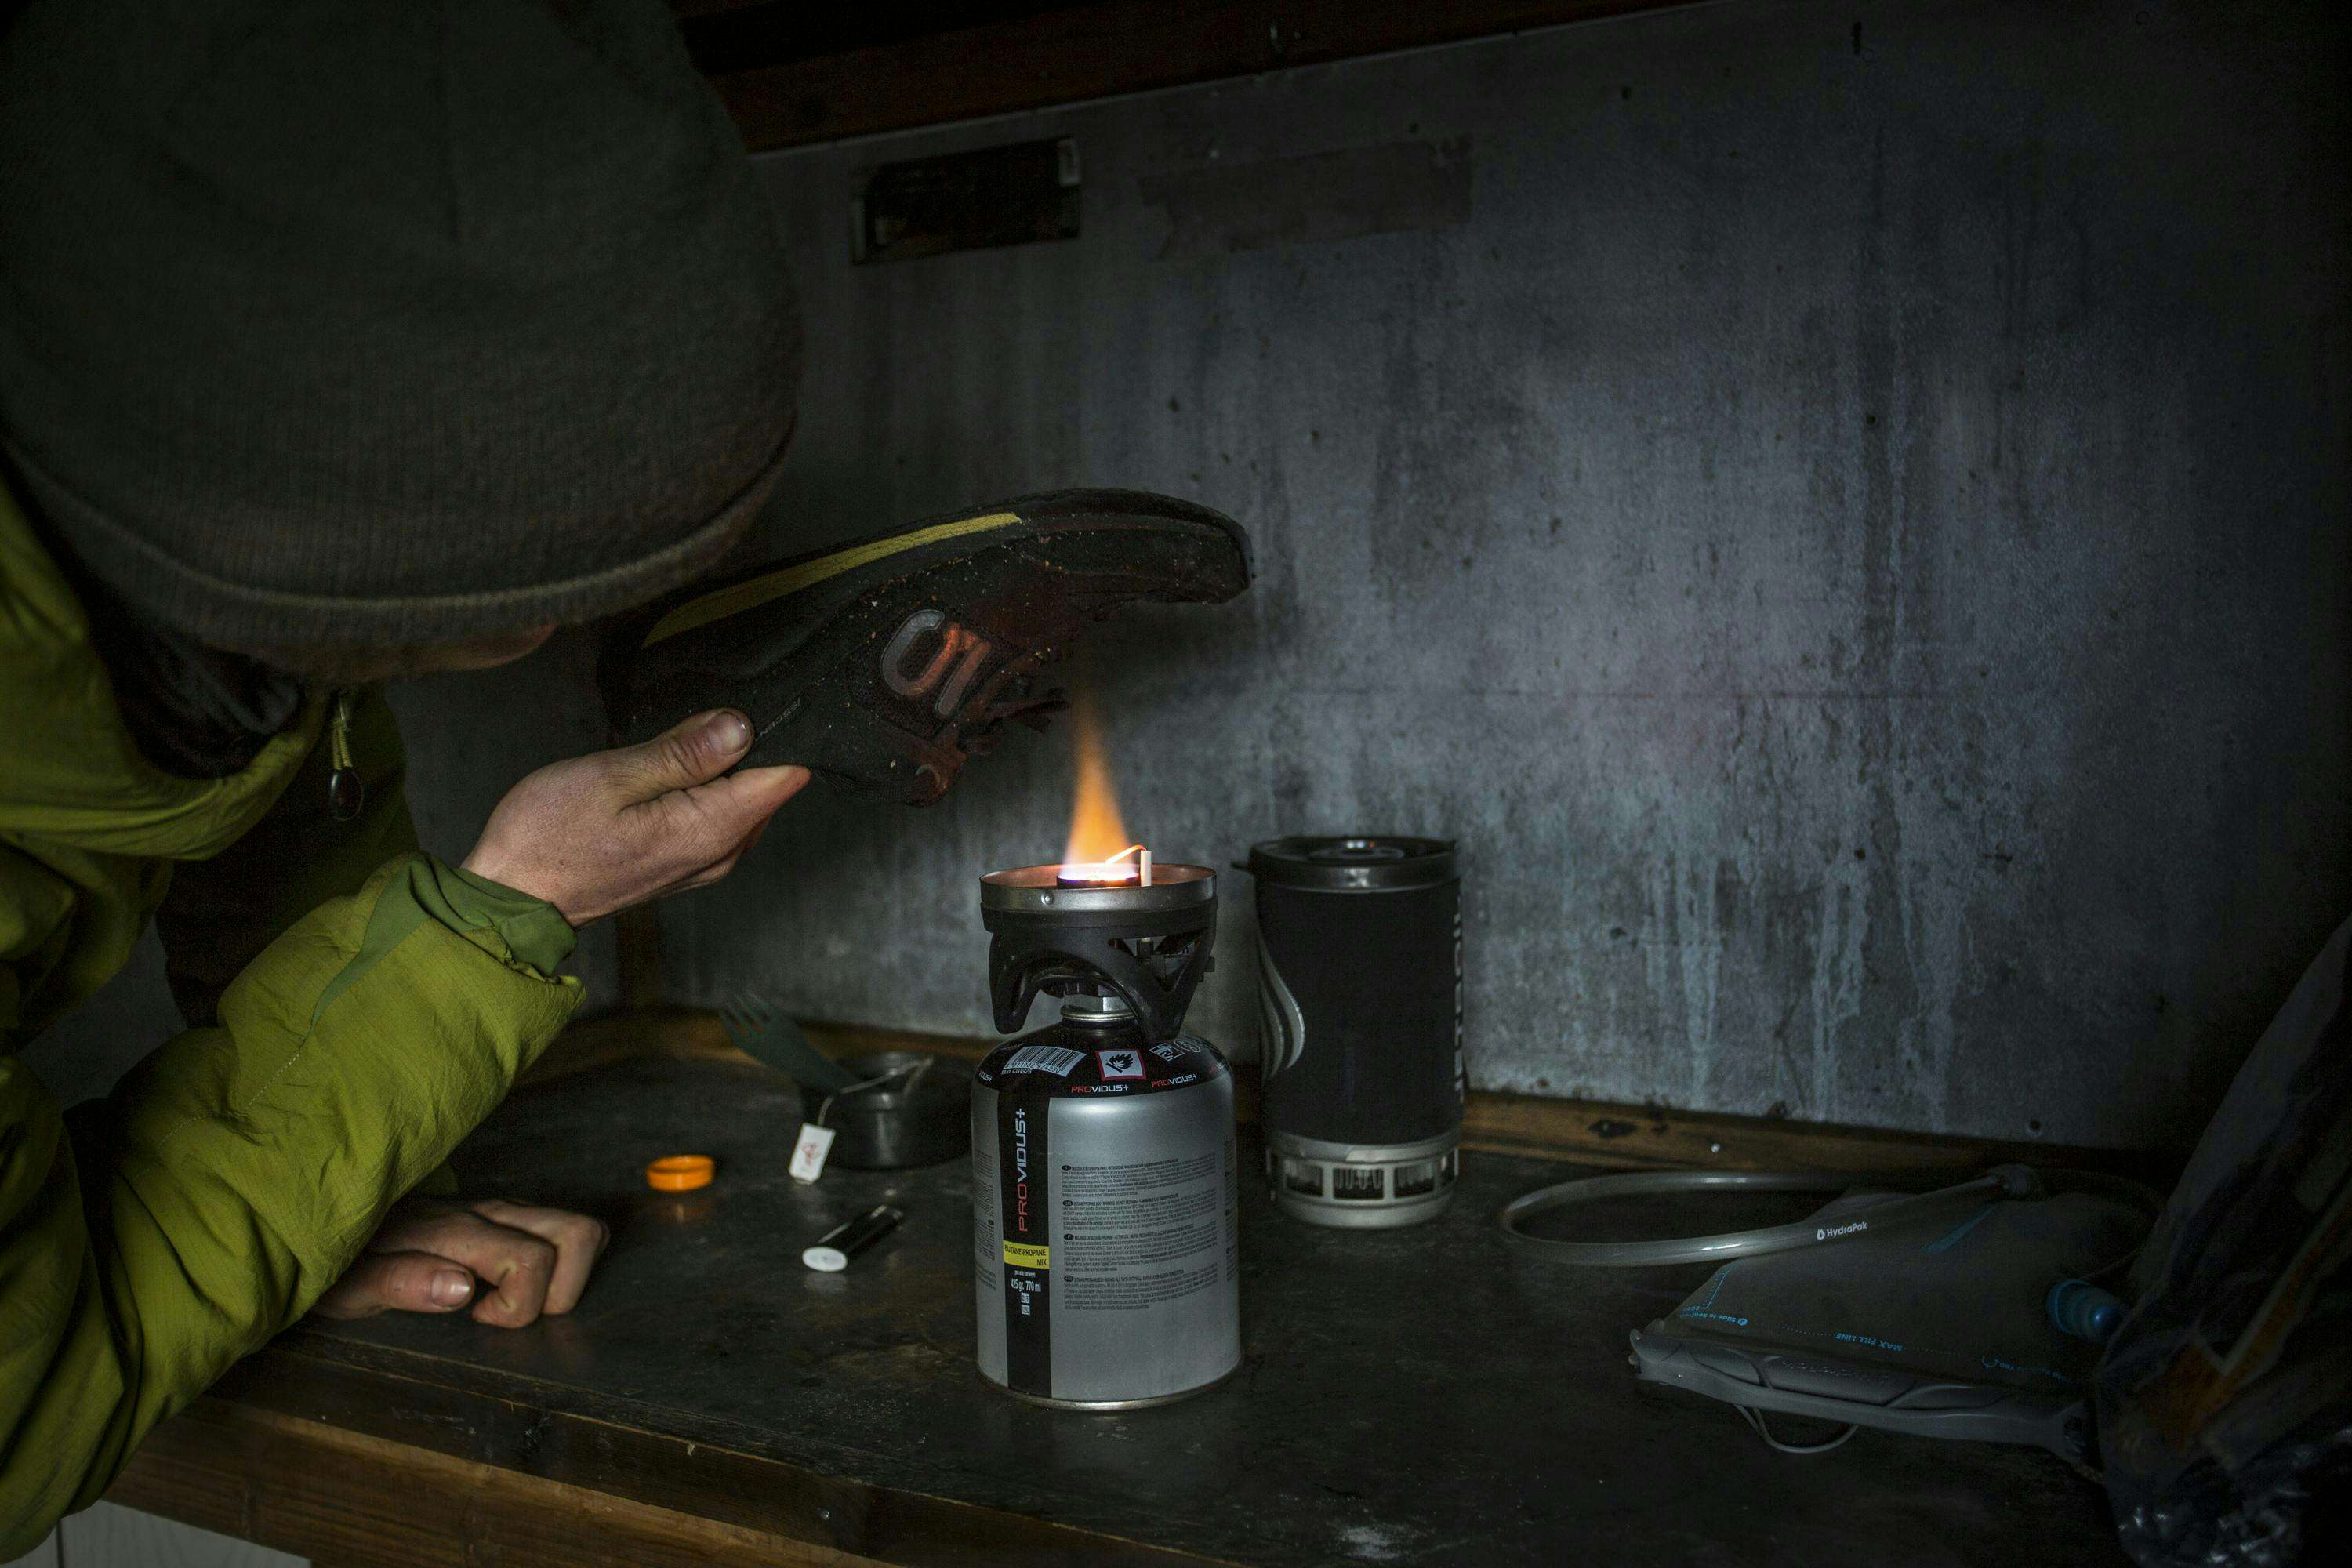 A hand holds a bike shoe over the open flame of a camp stove, trying to dry it out.